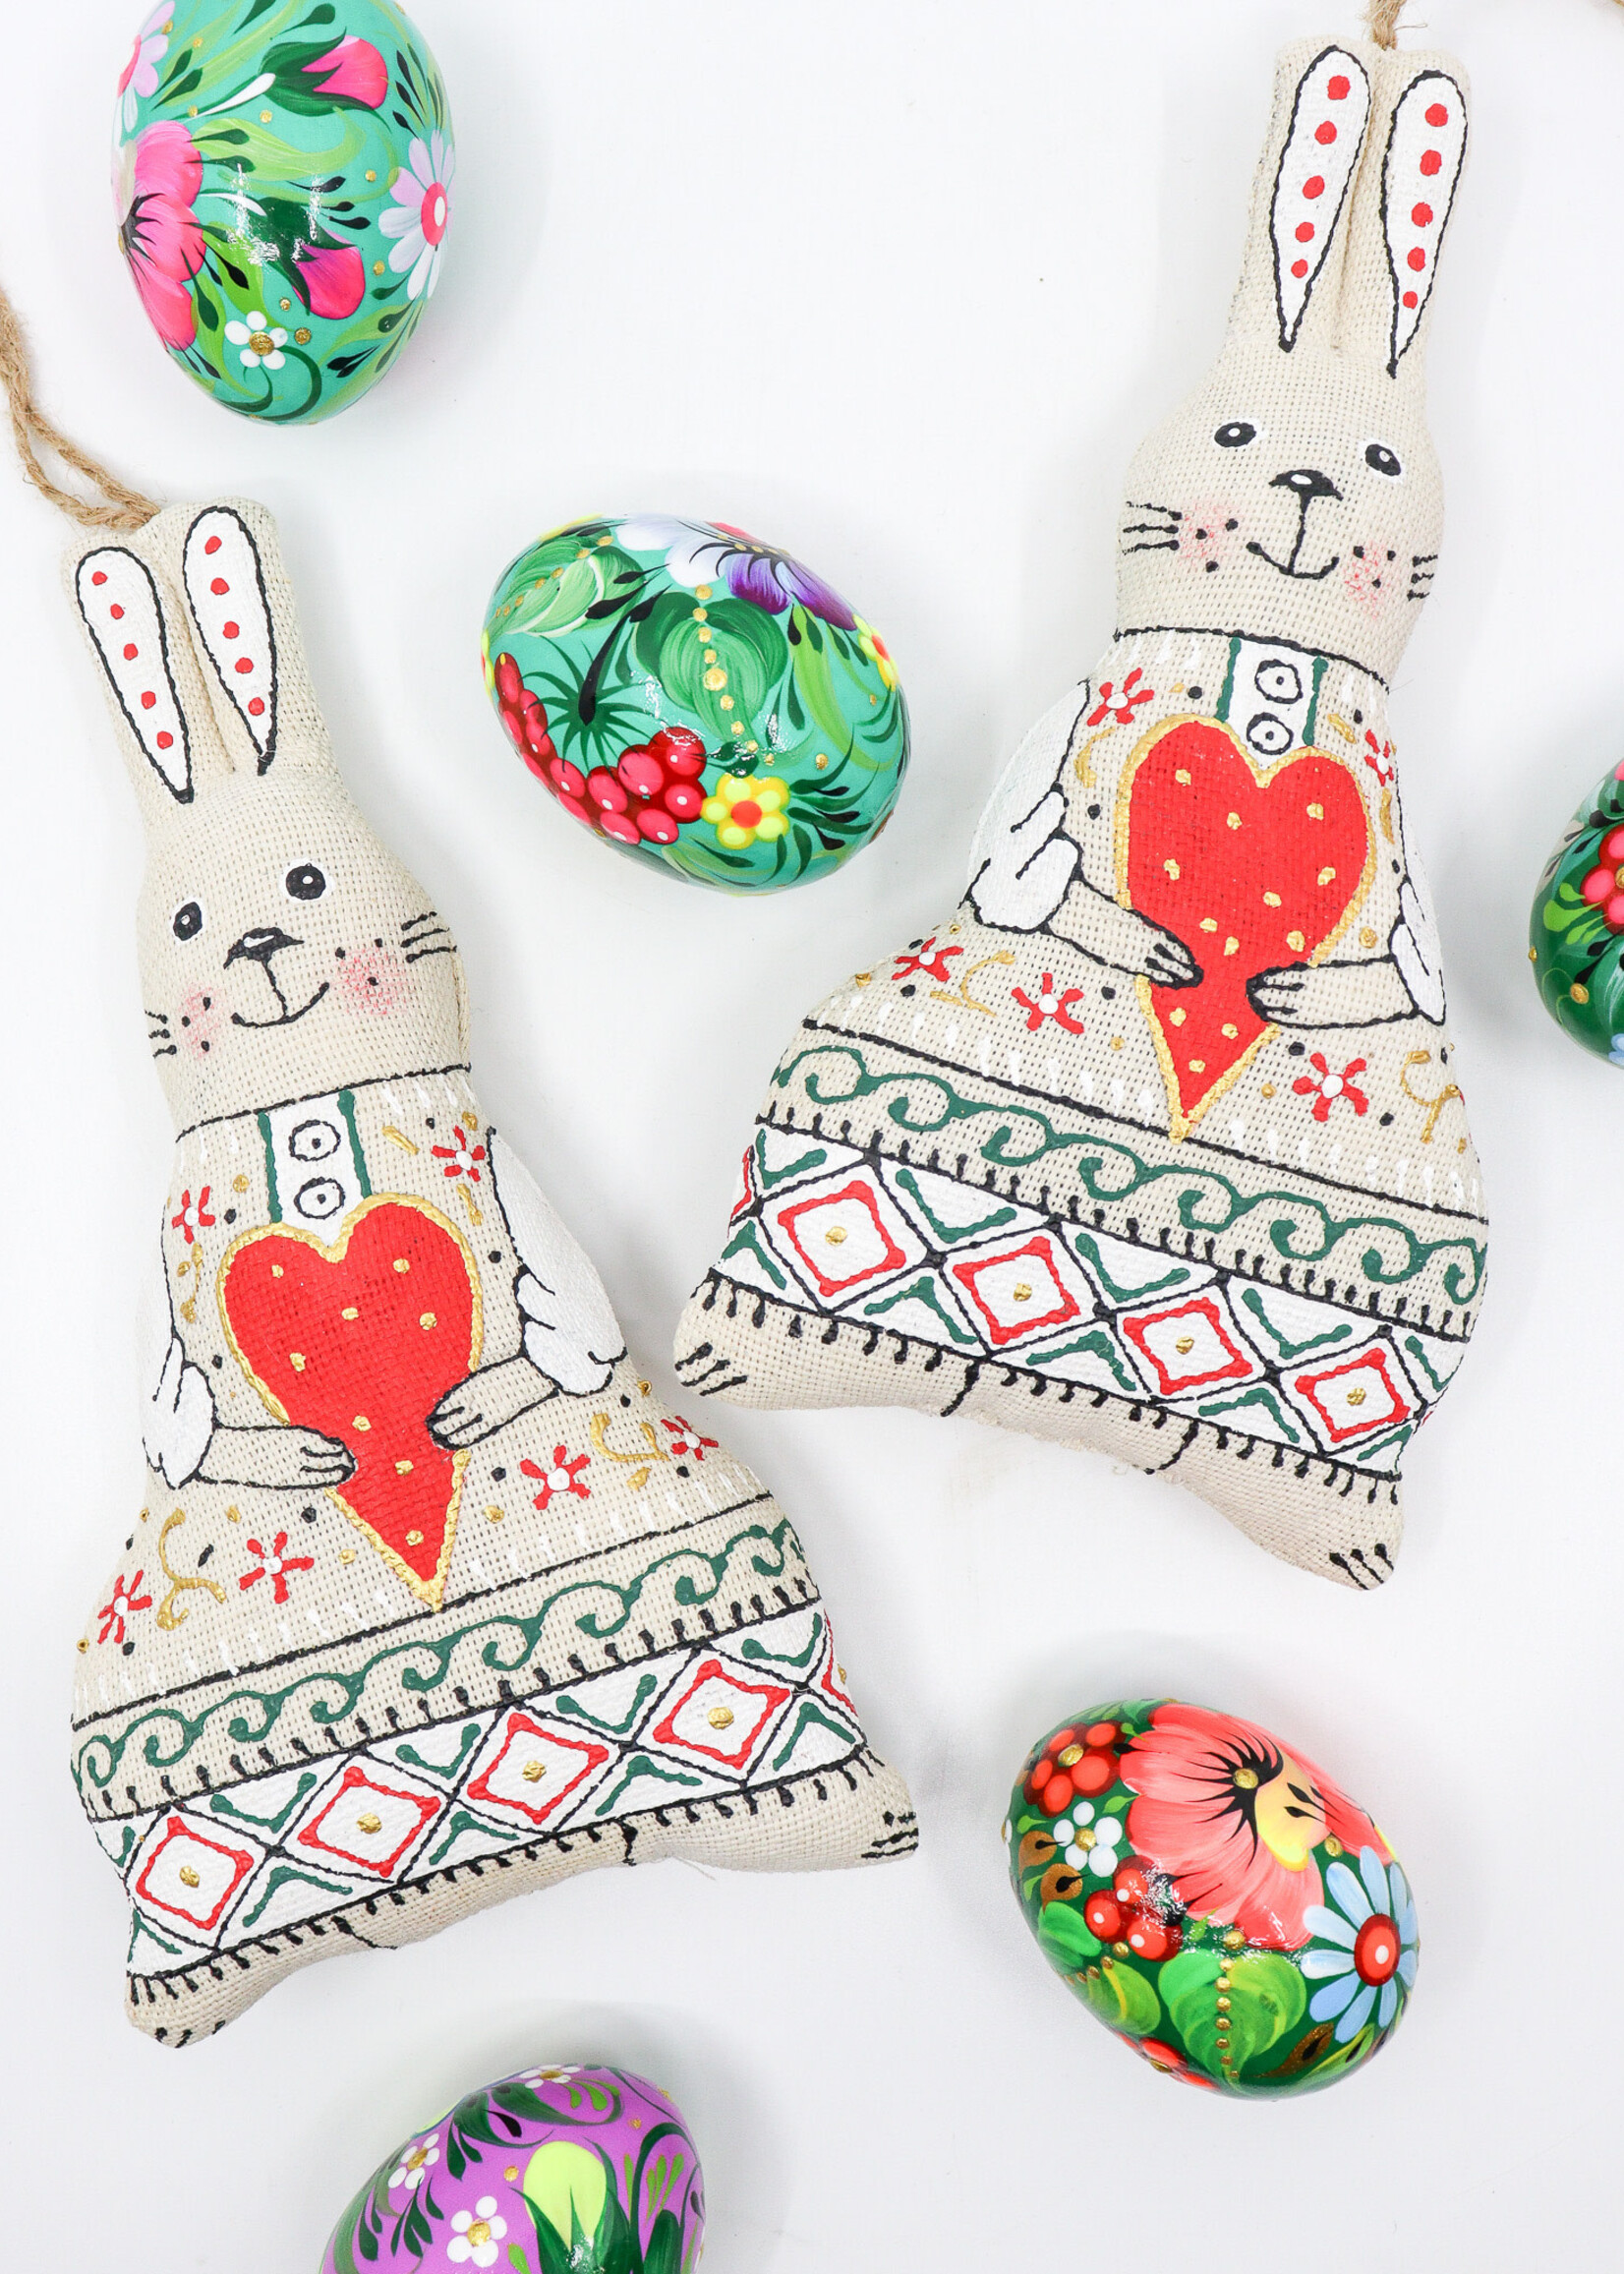 HOME -  Bunny with Heart, Koza Dereza Ornament, Vanilla Collection, Textile, Hand-painted, Hand-made